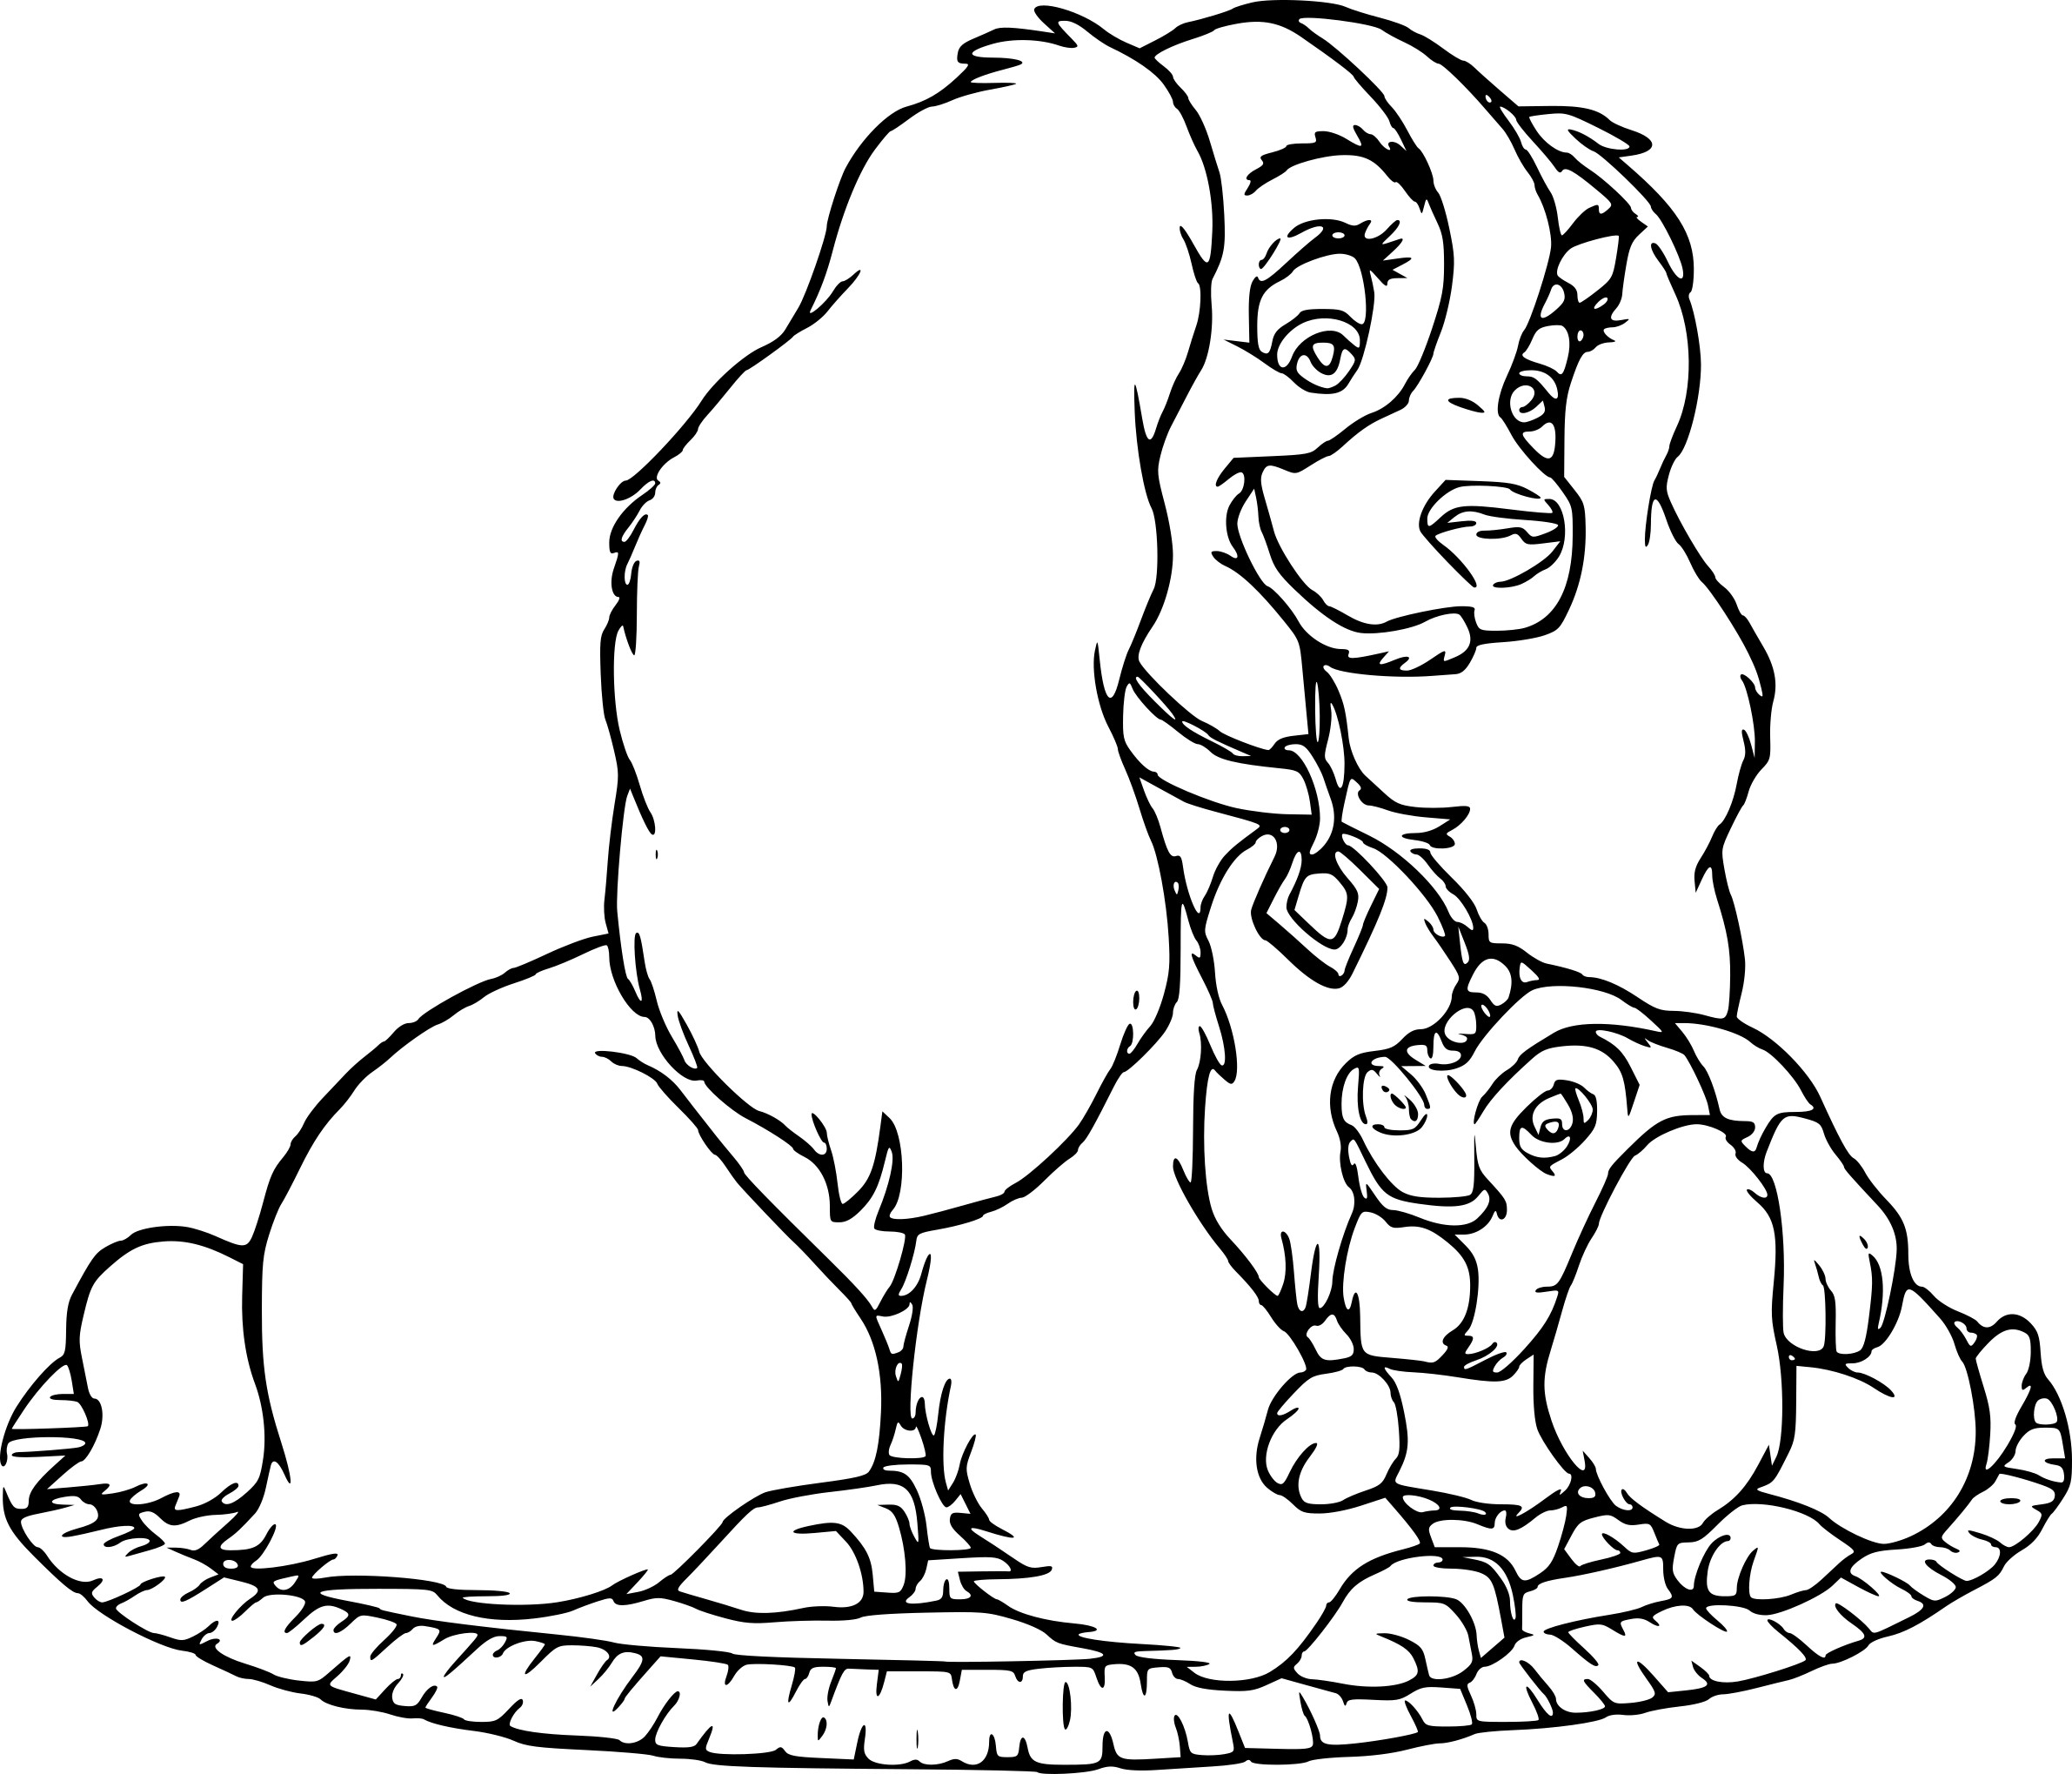 Beauty And The Tramp drawing and coloring page